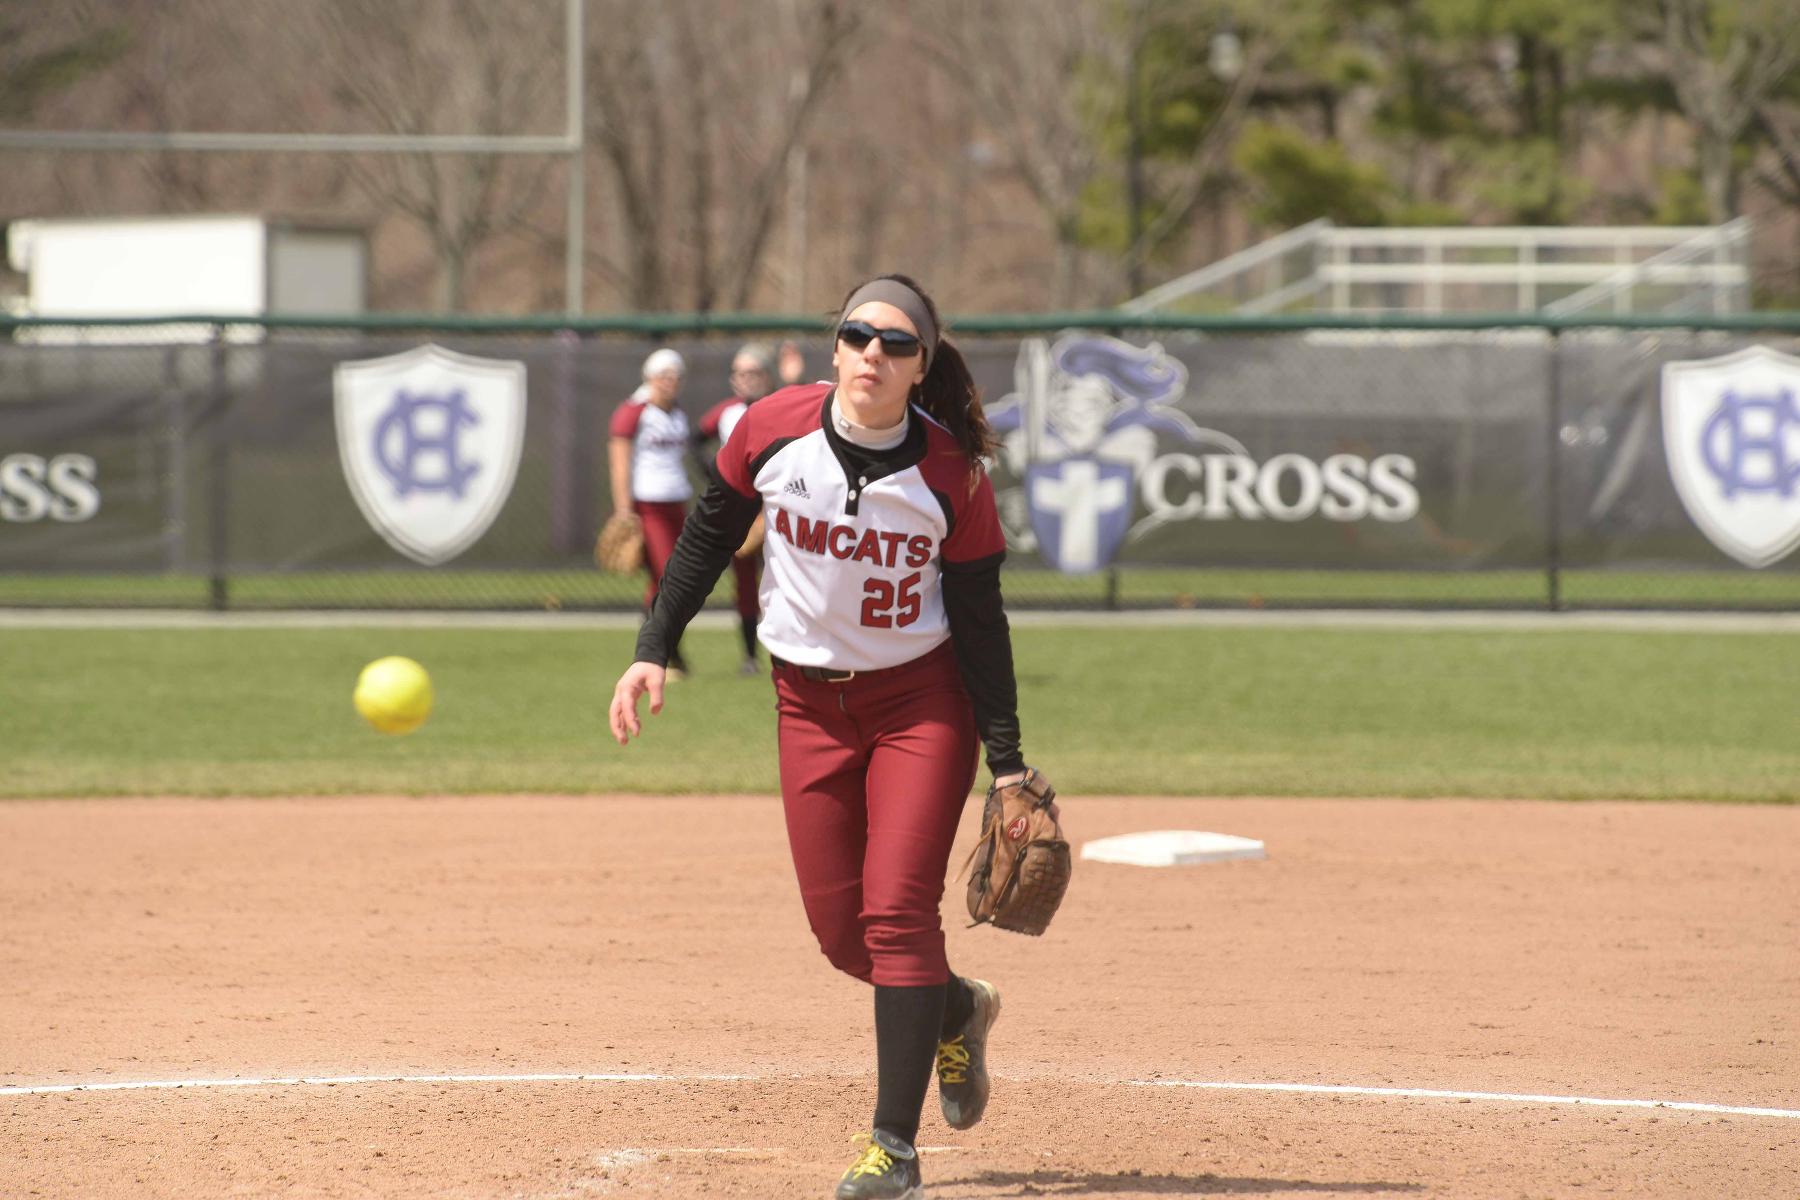 AMCATS Fall in Final Inning with SUNY POLY